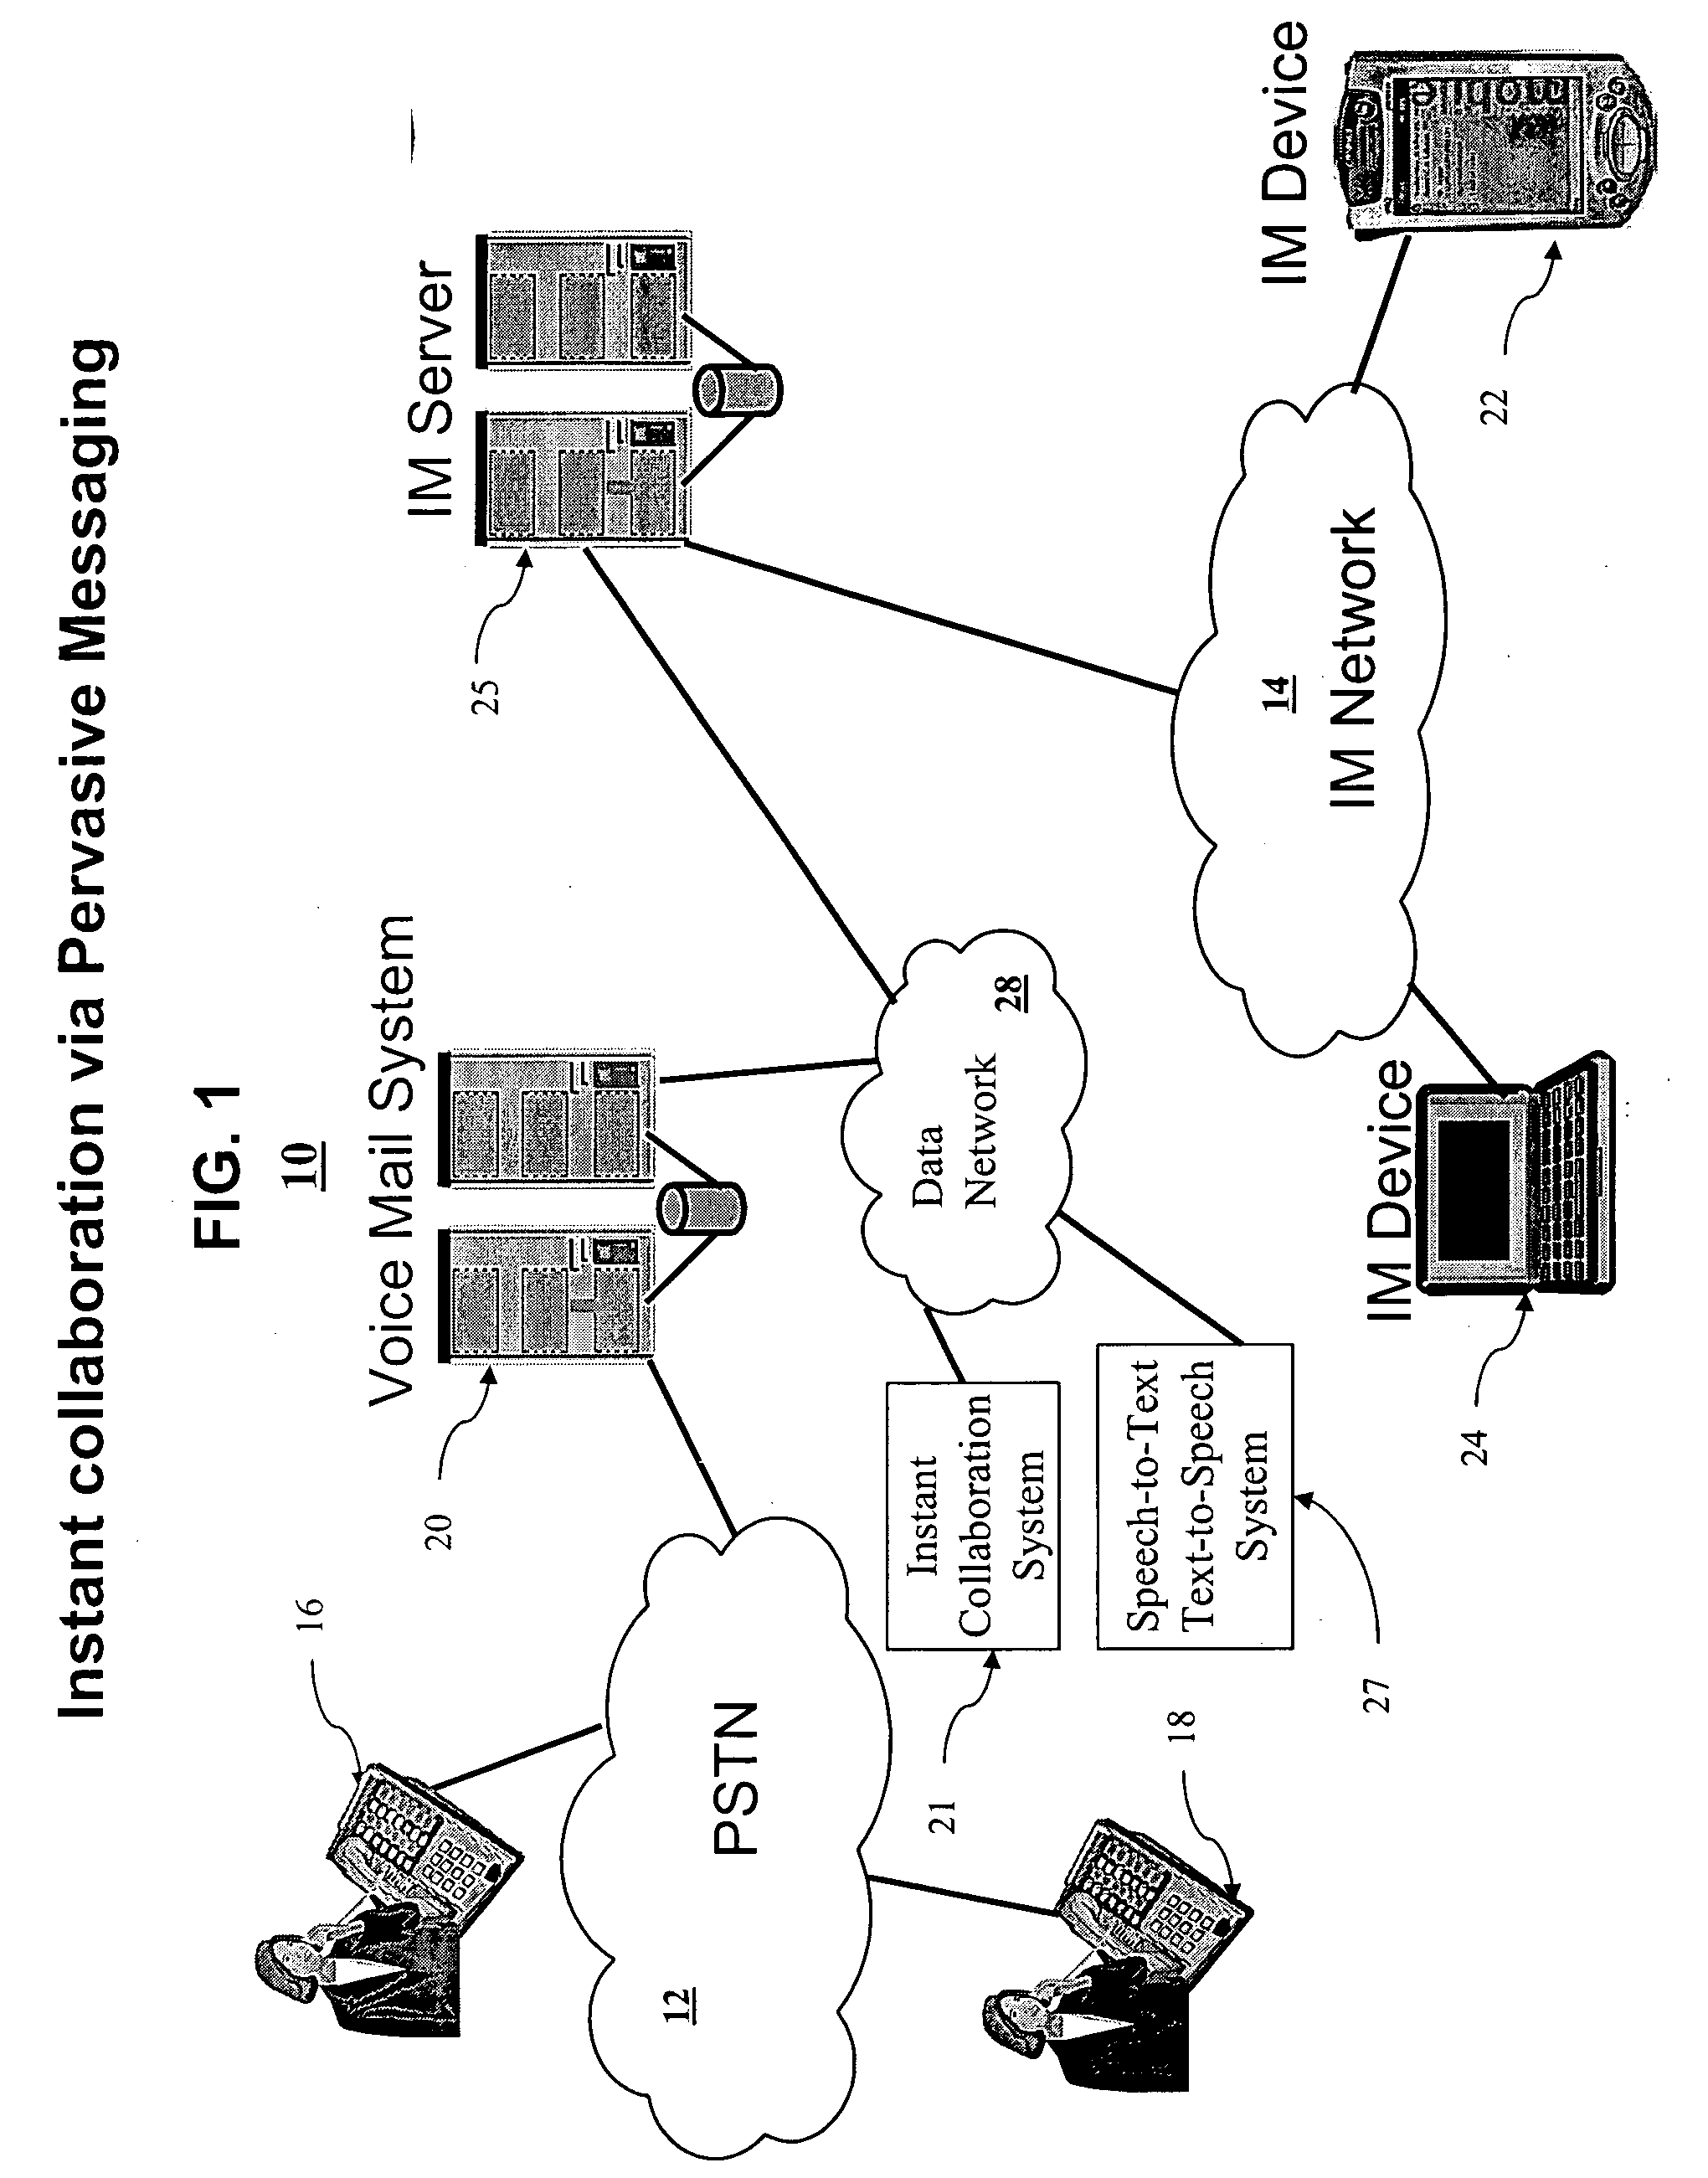 Method to enable instant collaboration via use of pervasive messaging